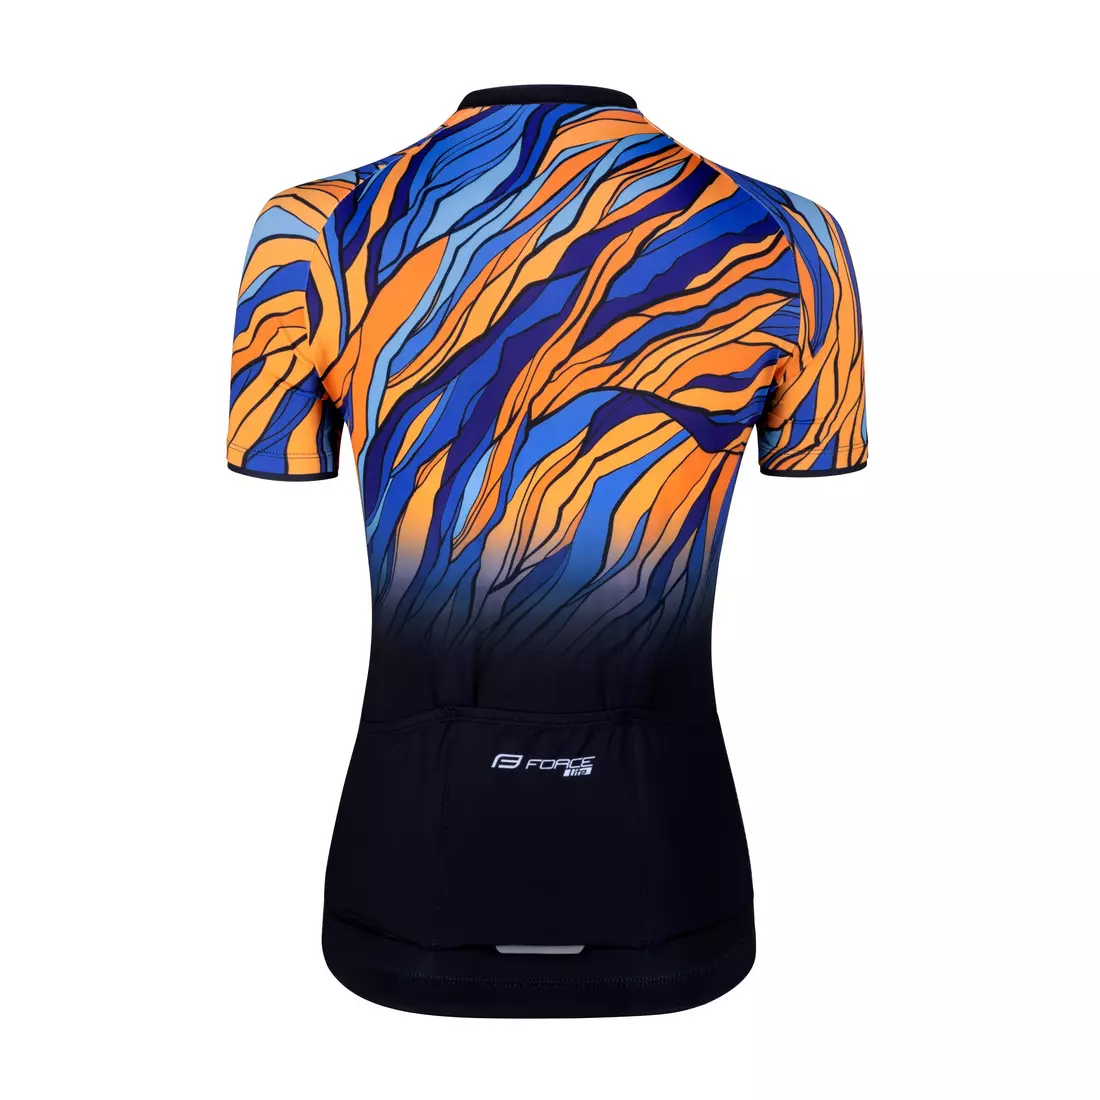 FORCE LIFE LADY women's cycling jersey, black, blue and orange